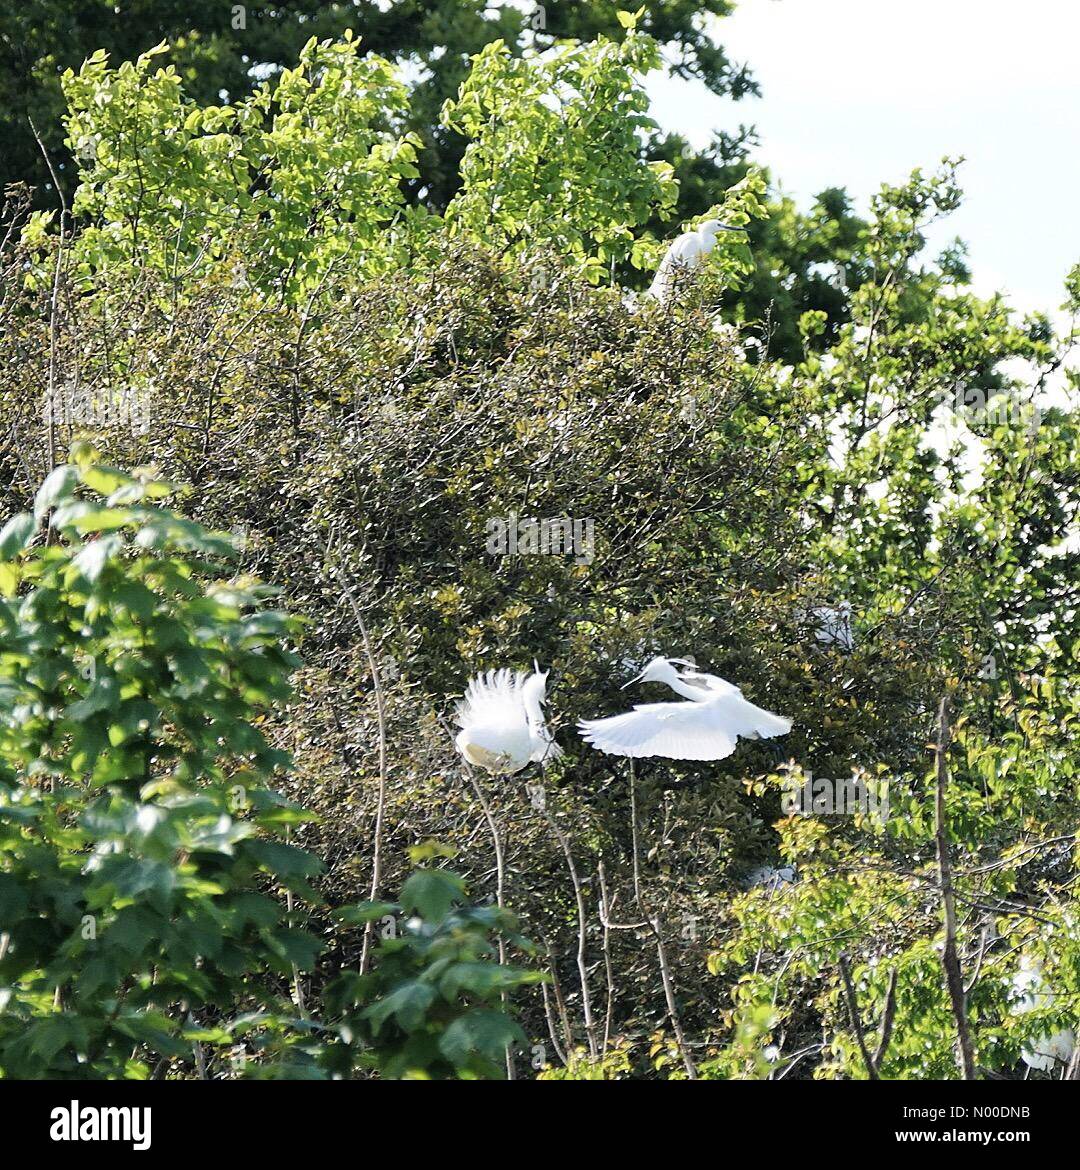 Havant, UK. 12th May, 2017. UK Weather: Sunny in Havant. Langstone Rd, Havant. 12th May 2017. Sunny intervals over the south coast today. A little egret feeding her chick at a nature reserve in Havant. Credit: jamesjagger/StockimoNews/Alamy Live News Stock Photo